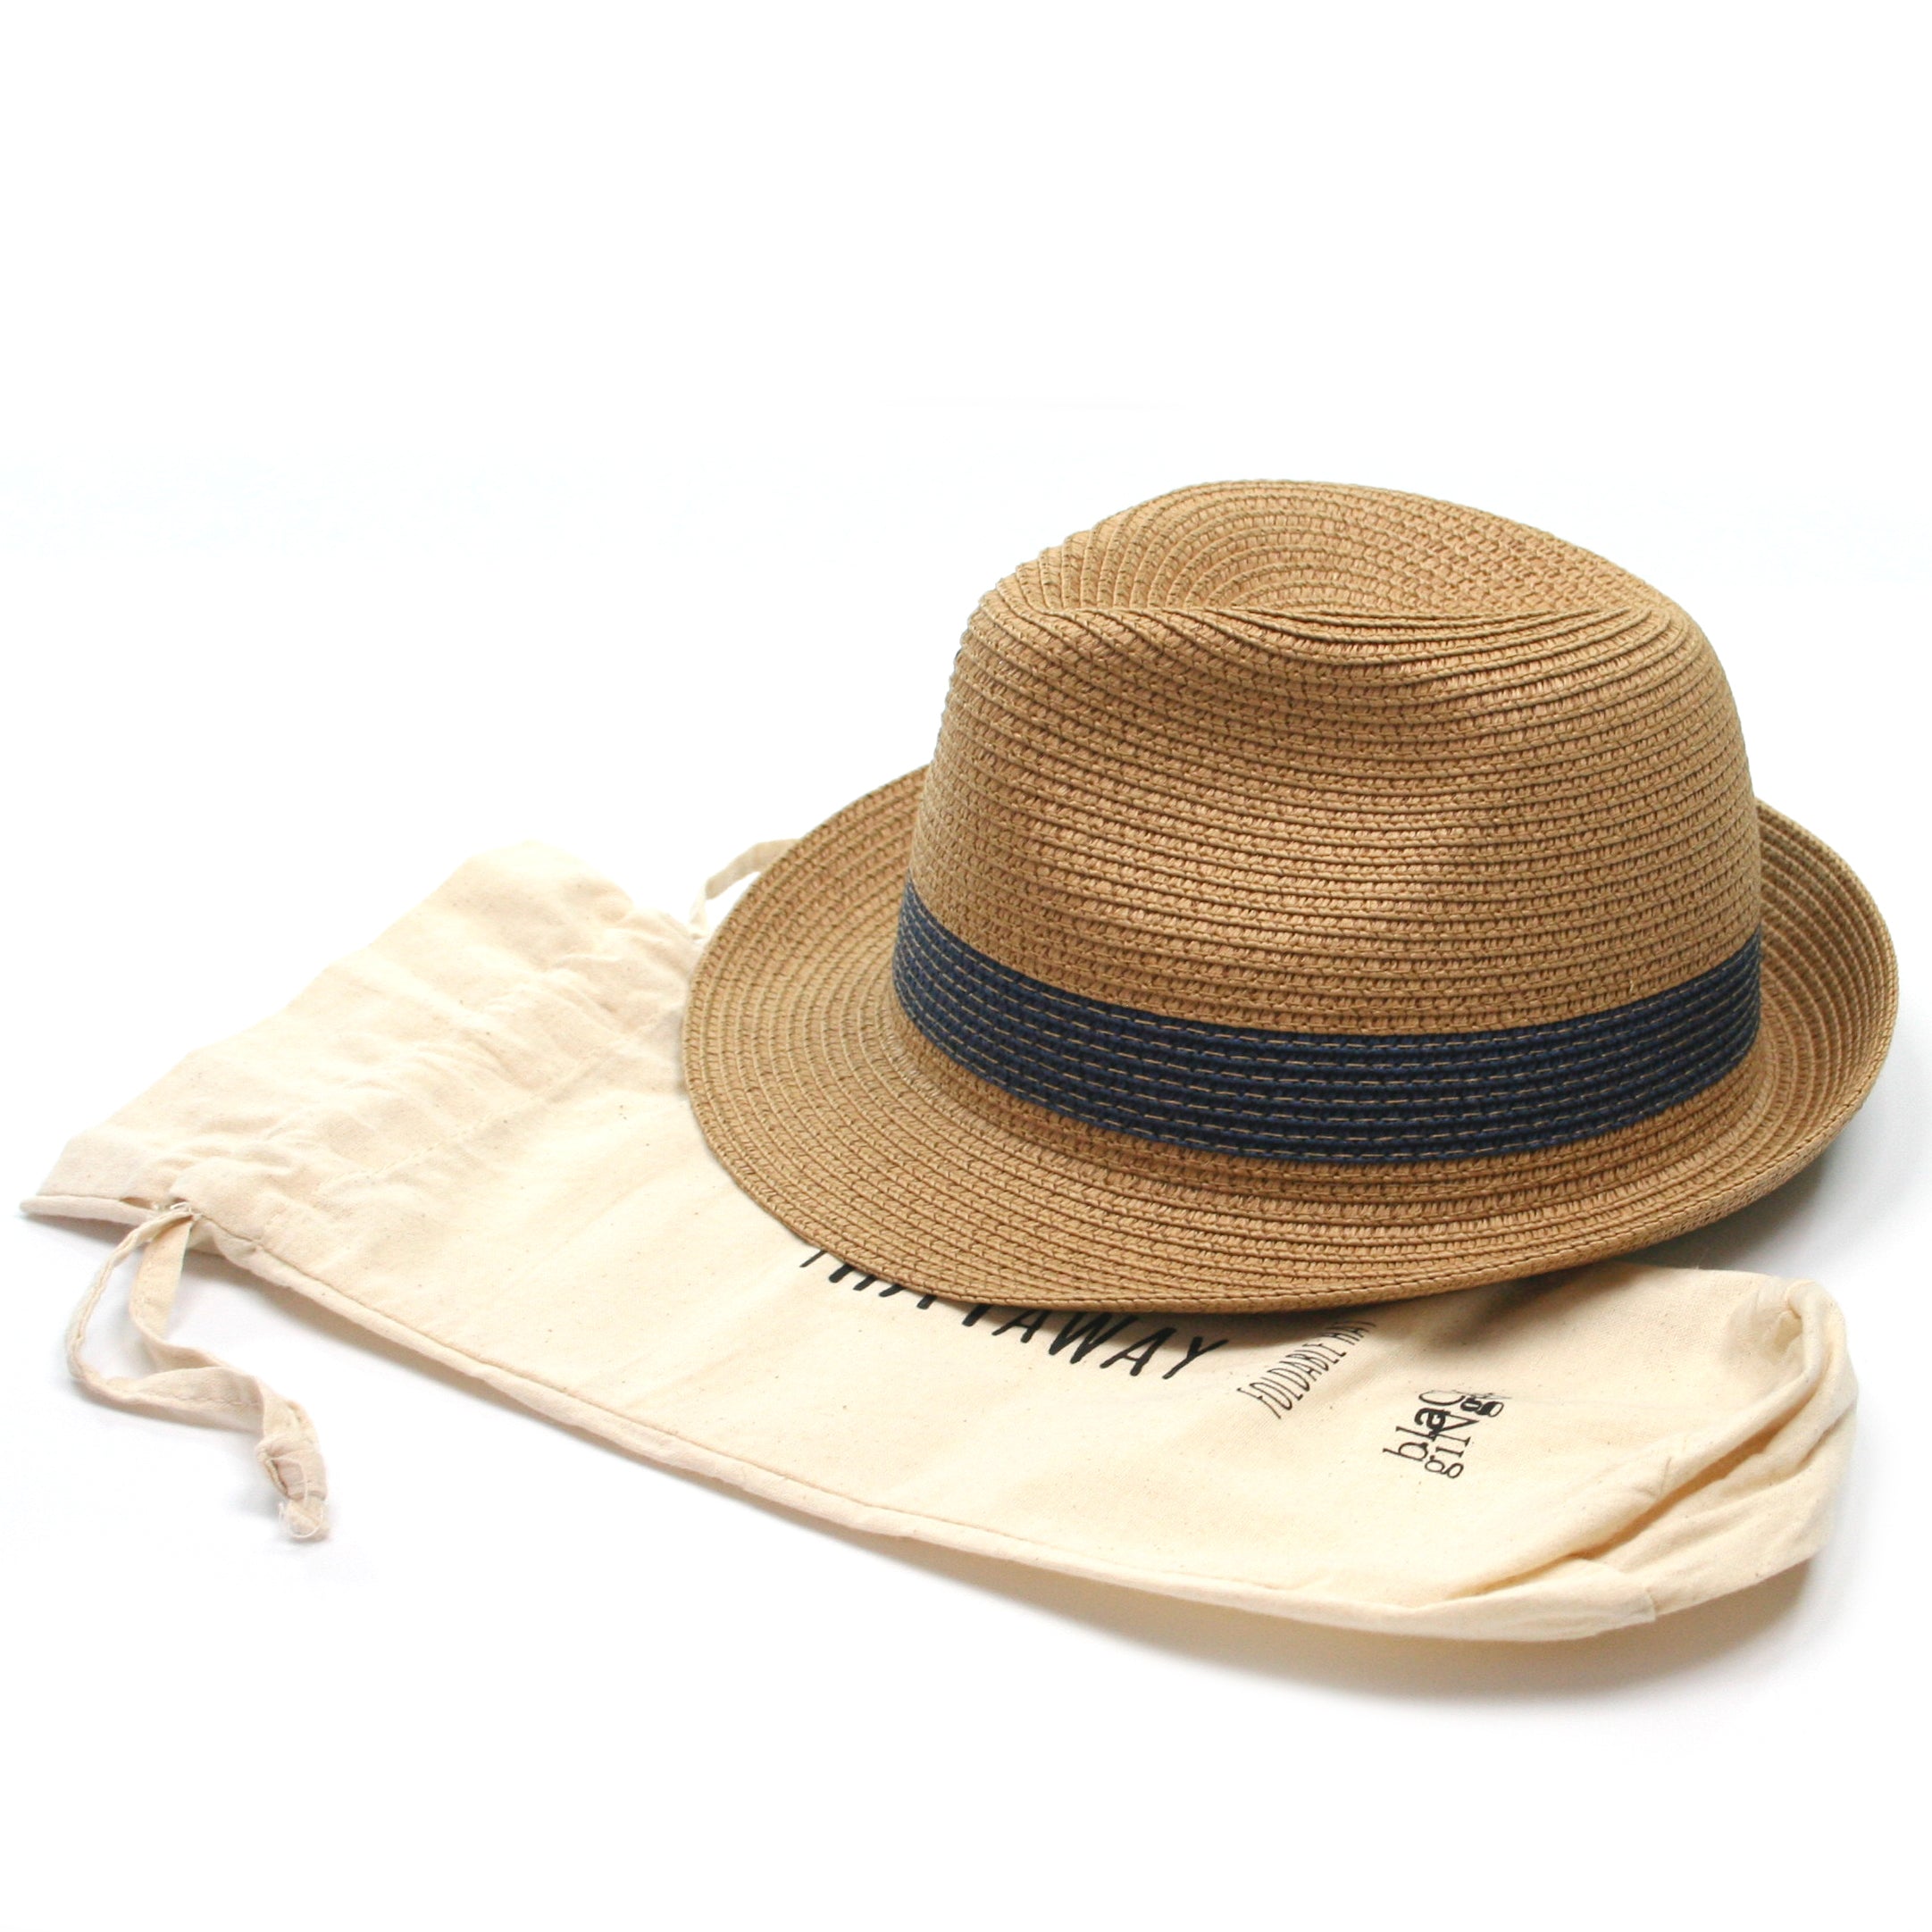 folding travel trilby sun hat with a blue ribbon